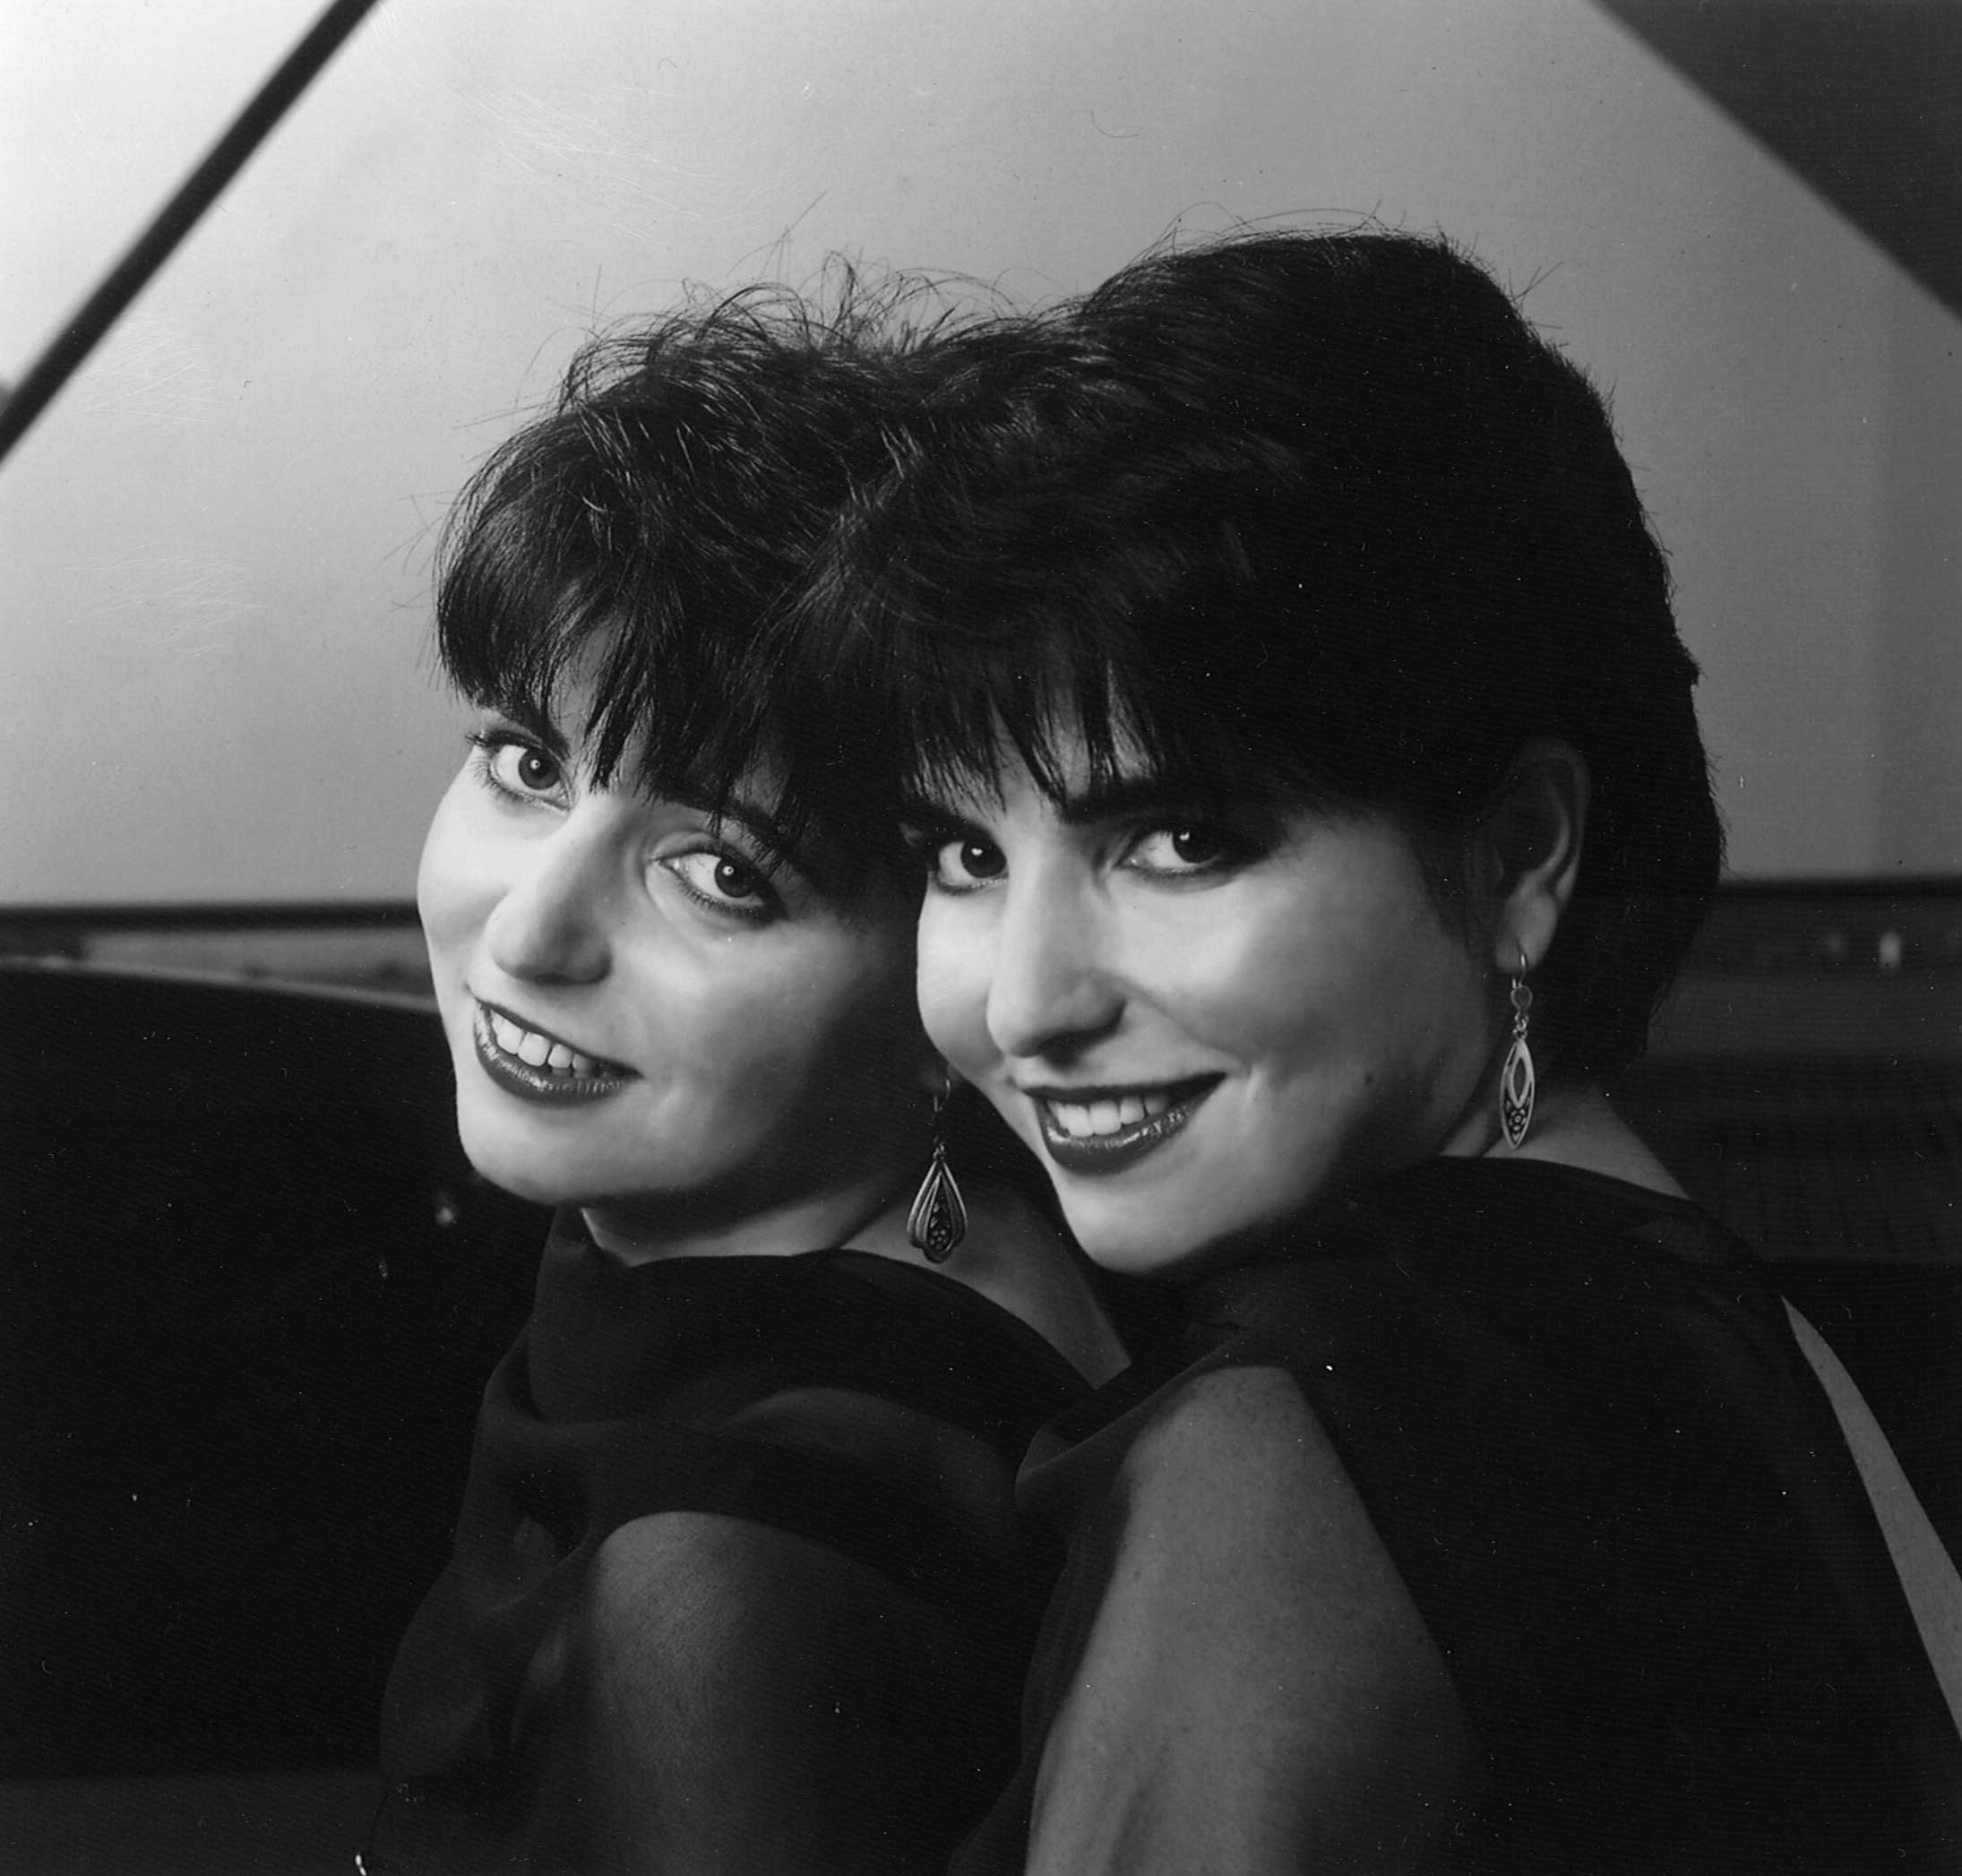 Elkina Twins smiling side by side in front of a piano